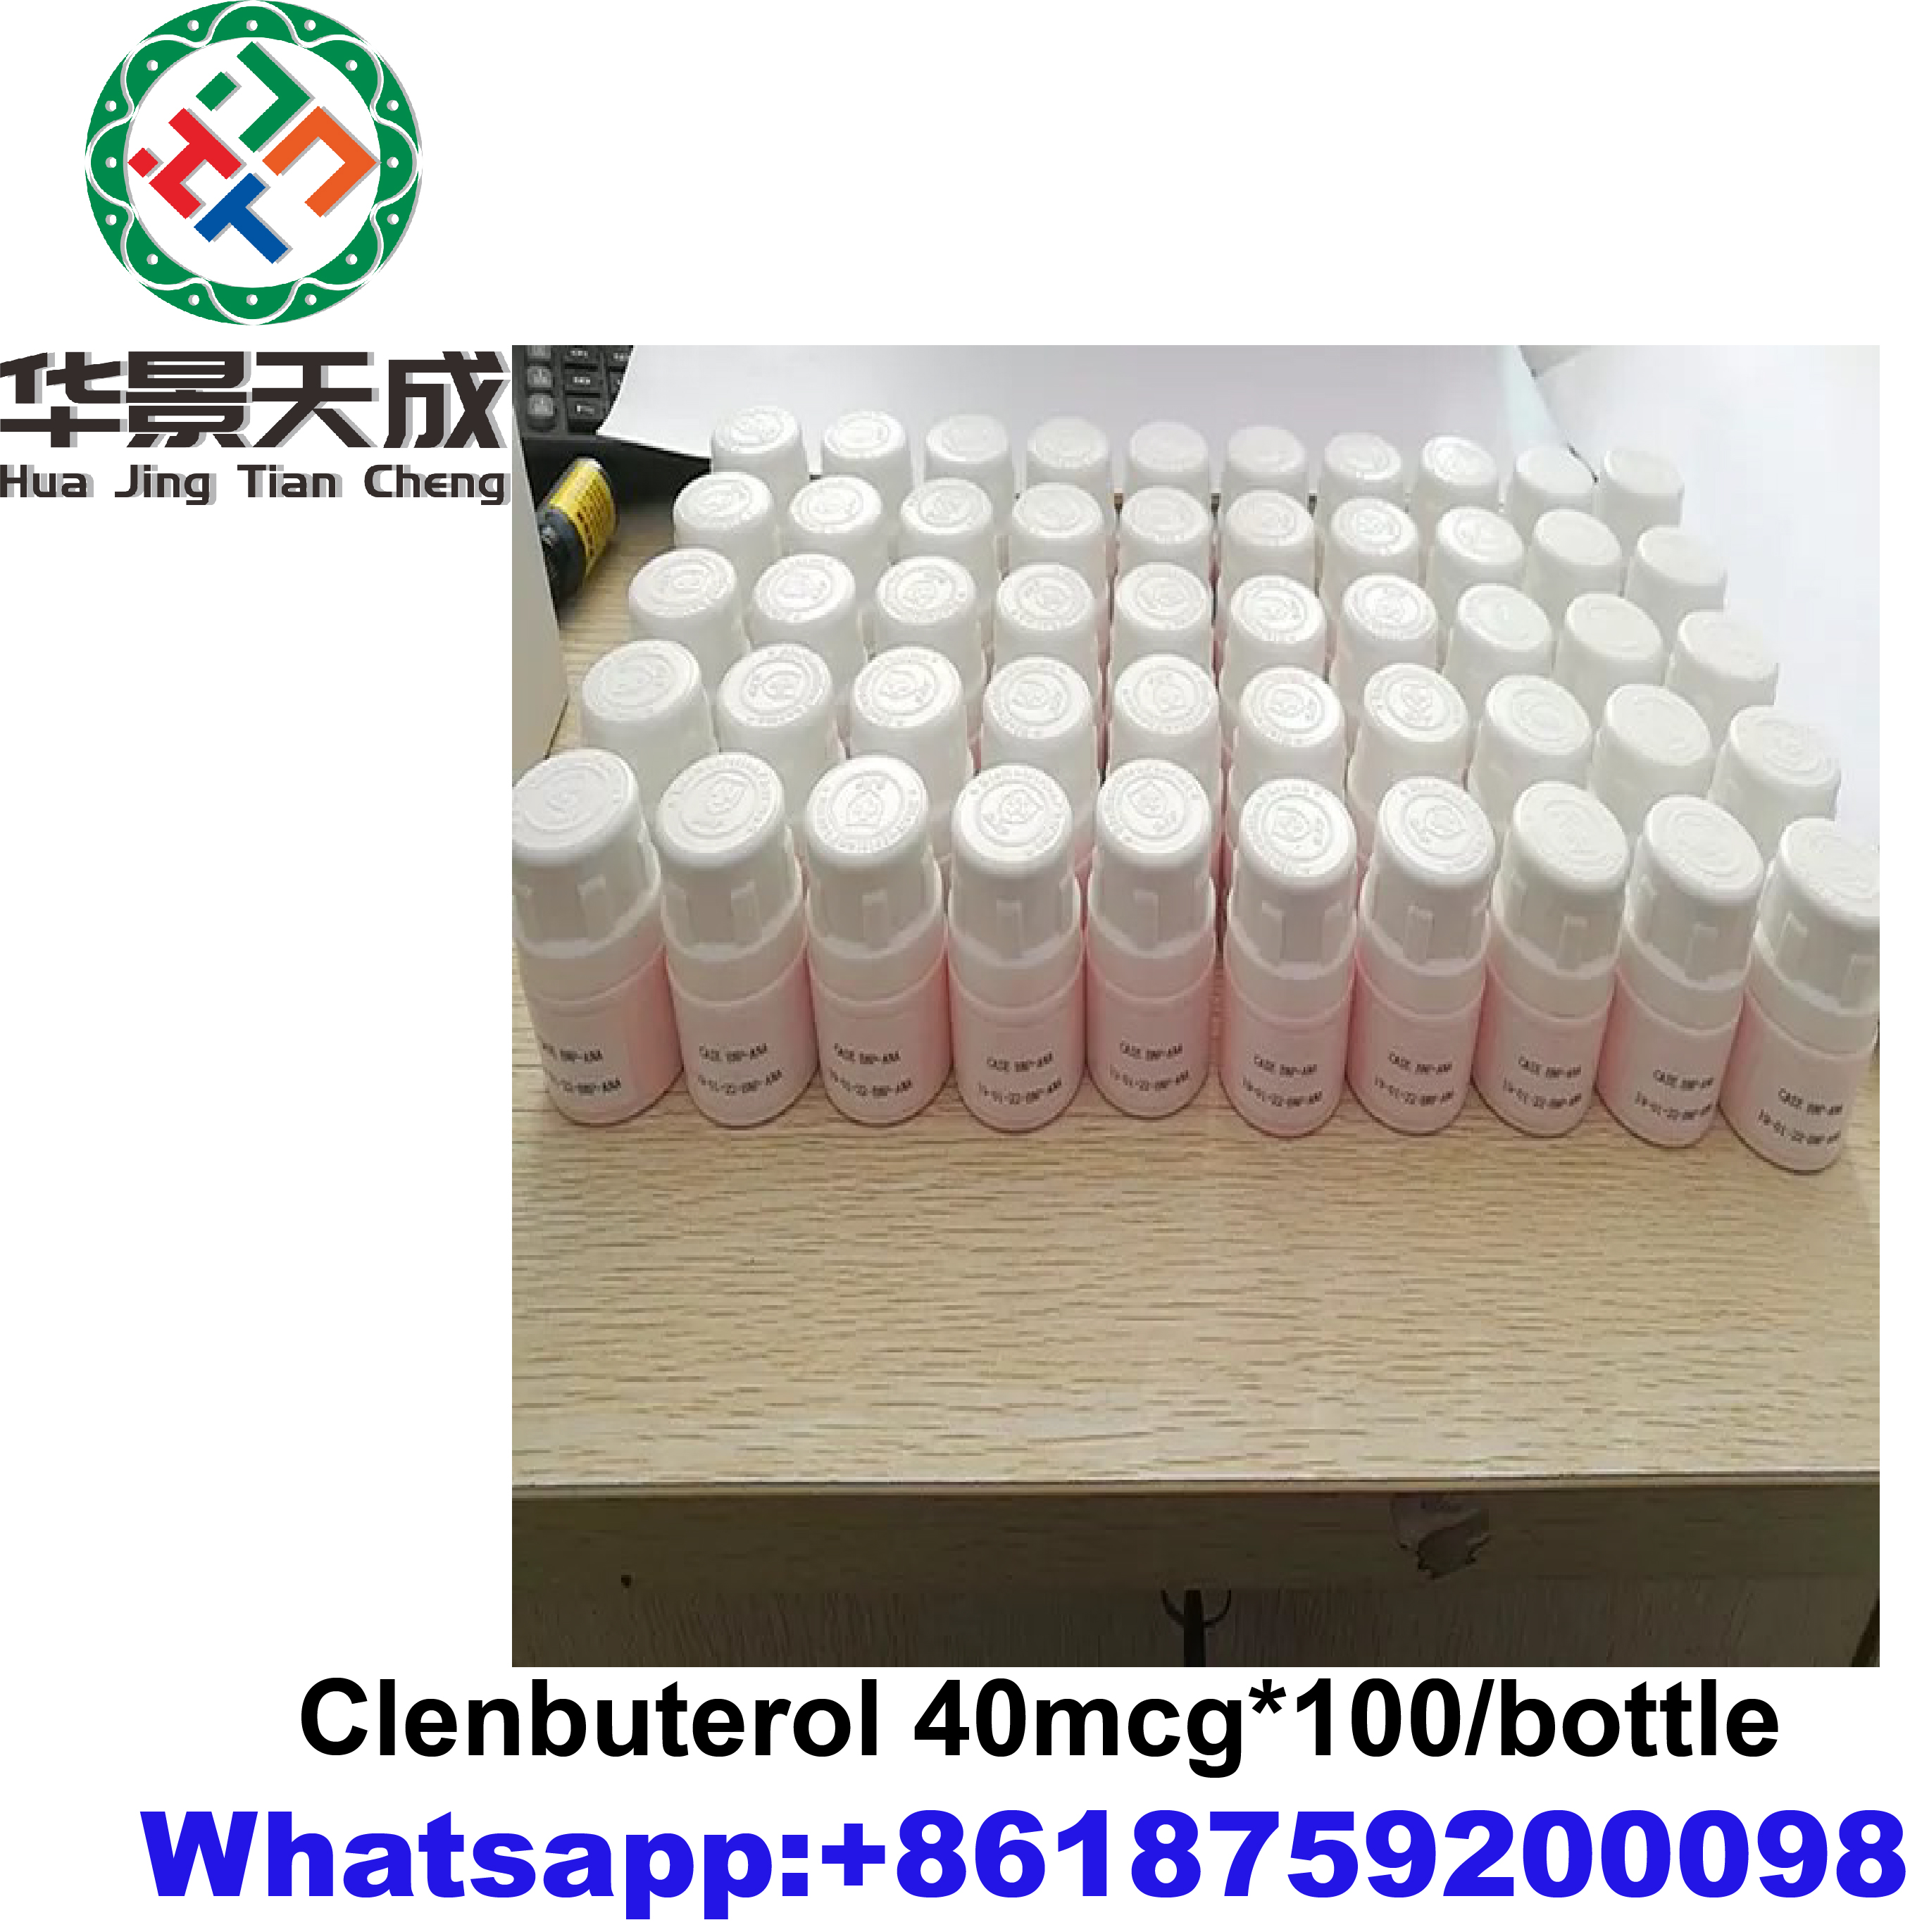  Clenbutrol 40mcg Pharmaceutical Muscle Cutting Steroid Prefinished 100pcs/ bottle